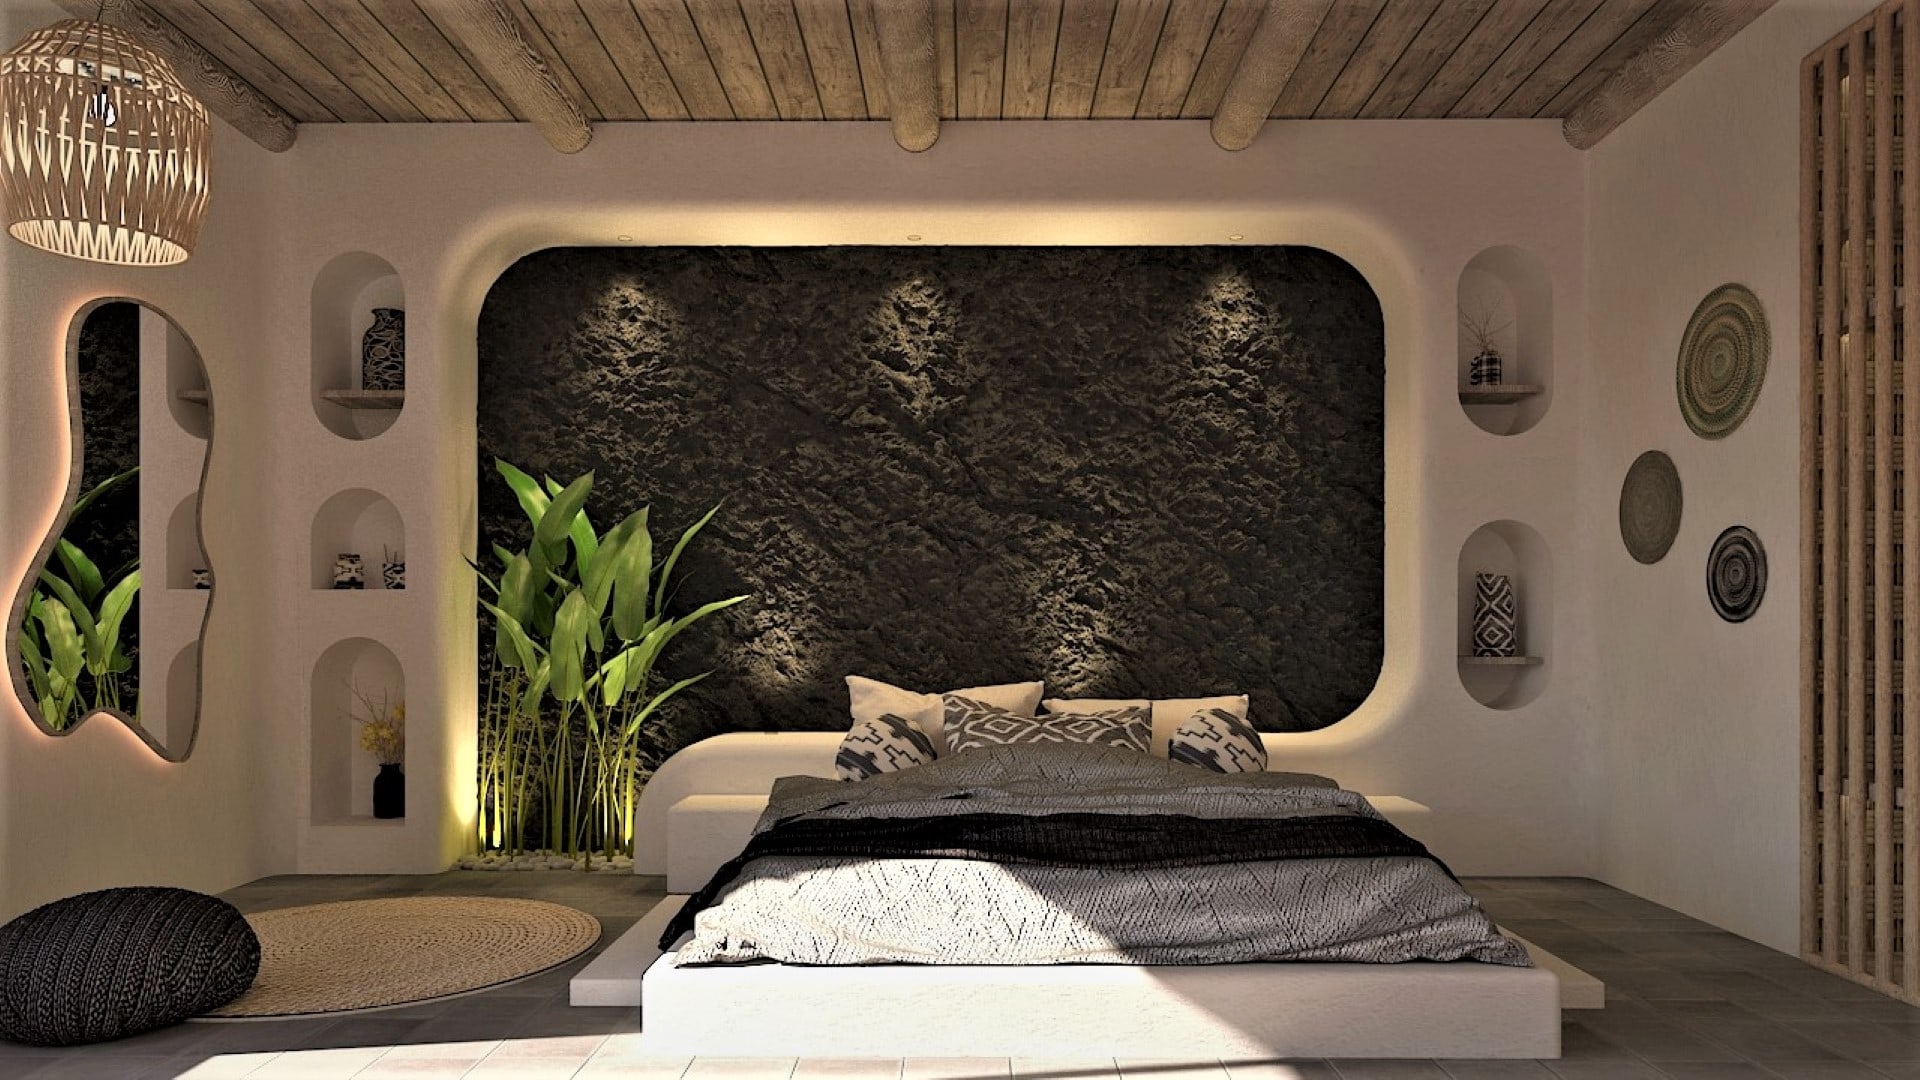 Organic accent wall bringing the outside in, bedroom by Homilo